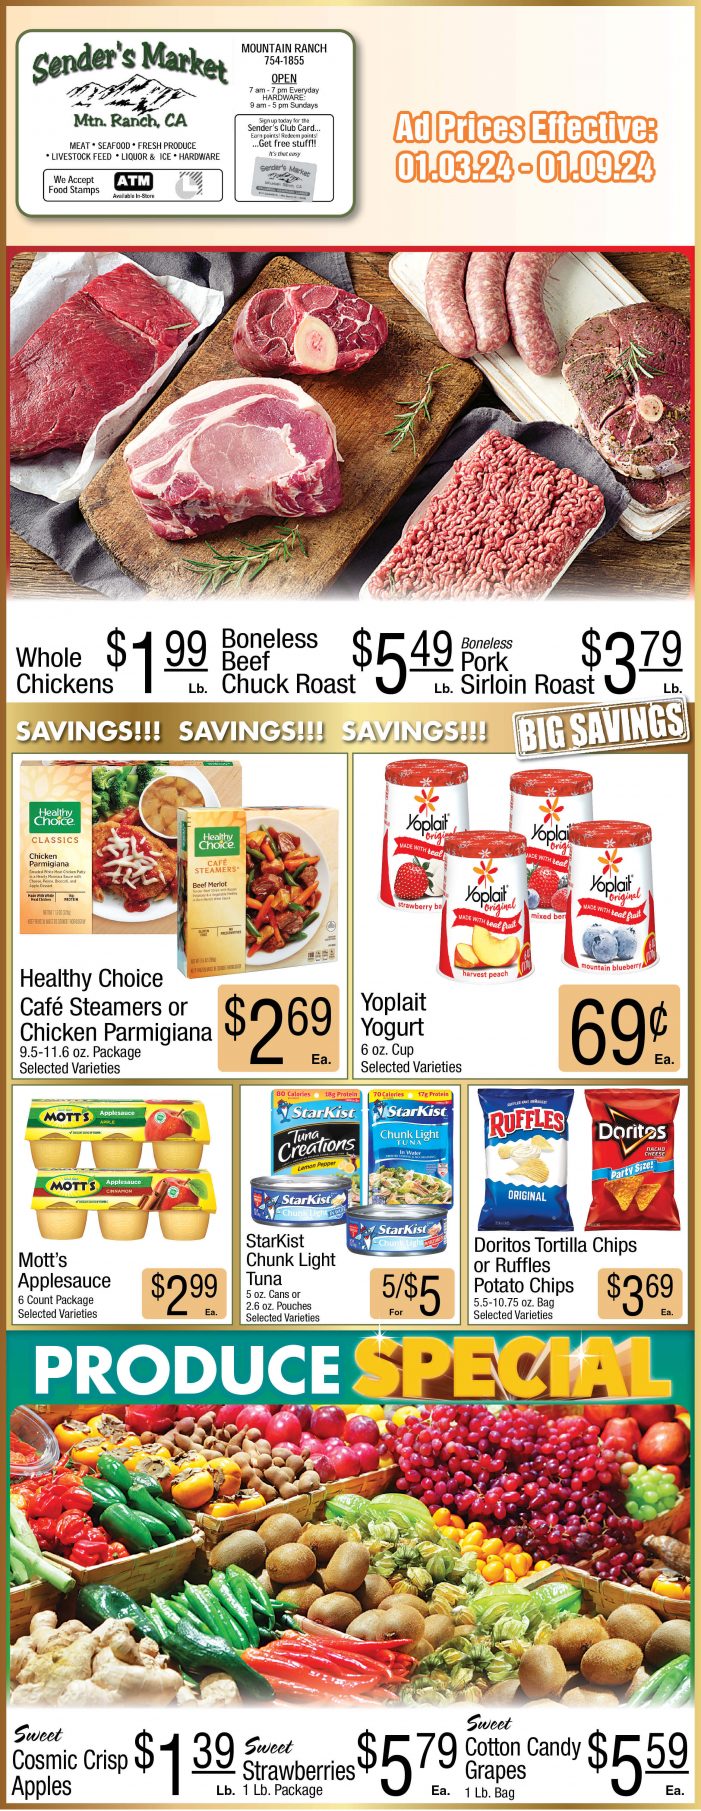 Sender’s Market Weekly Ad & Grocery Specials Through January 9th! Shop Local & Save!!